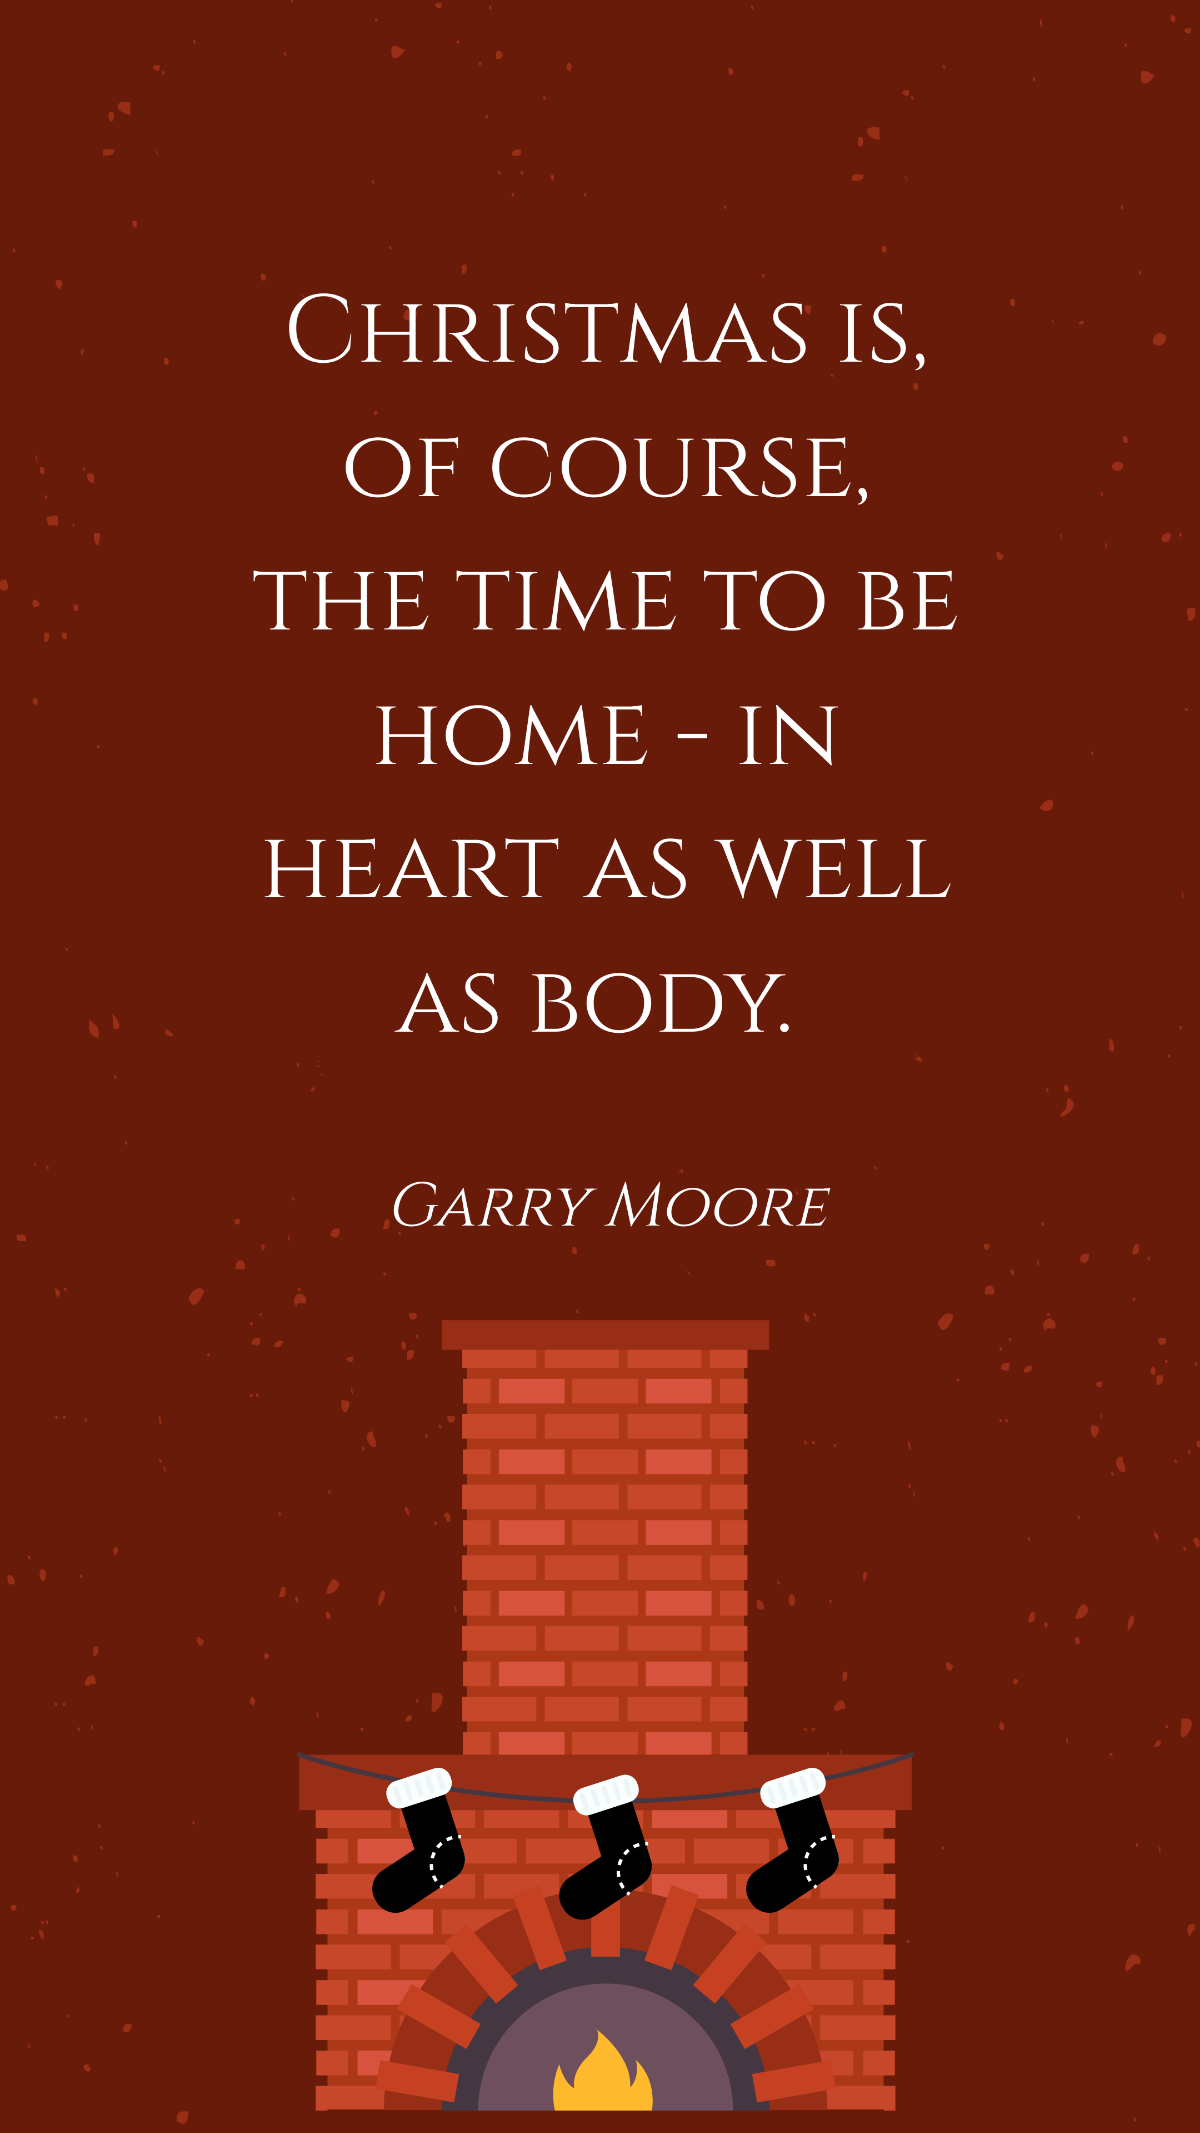 Garry Moore - Christmas is, of course, the time to be home - in heart as well as body. Template